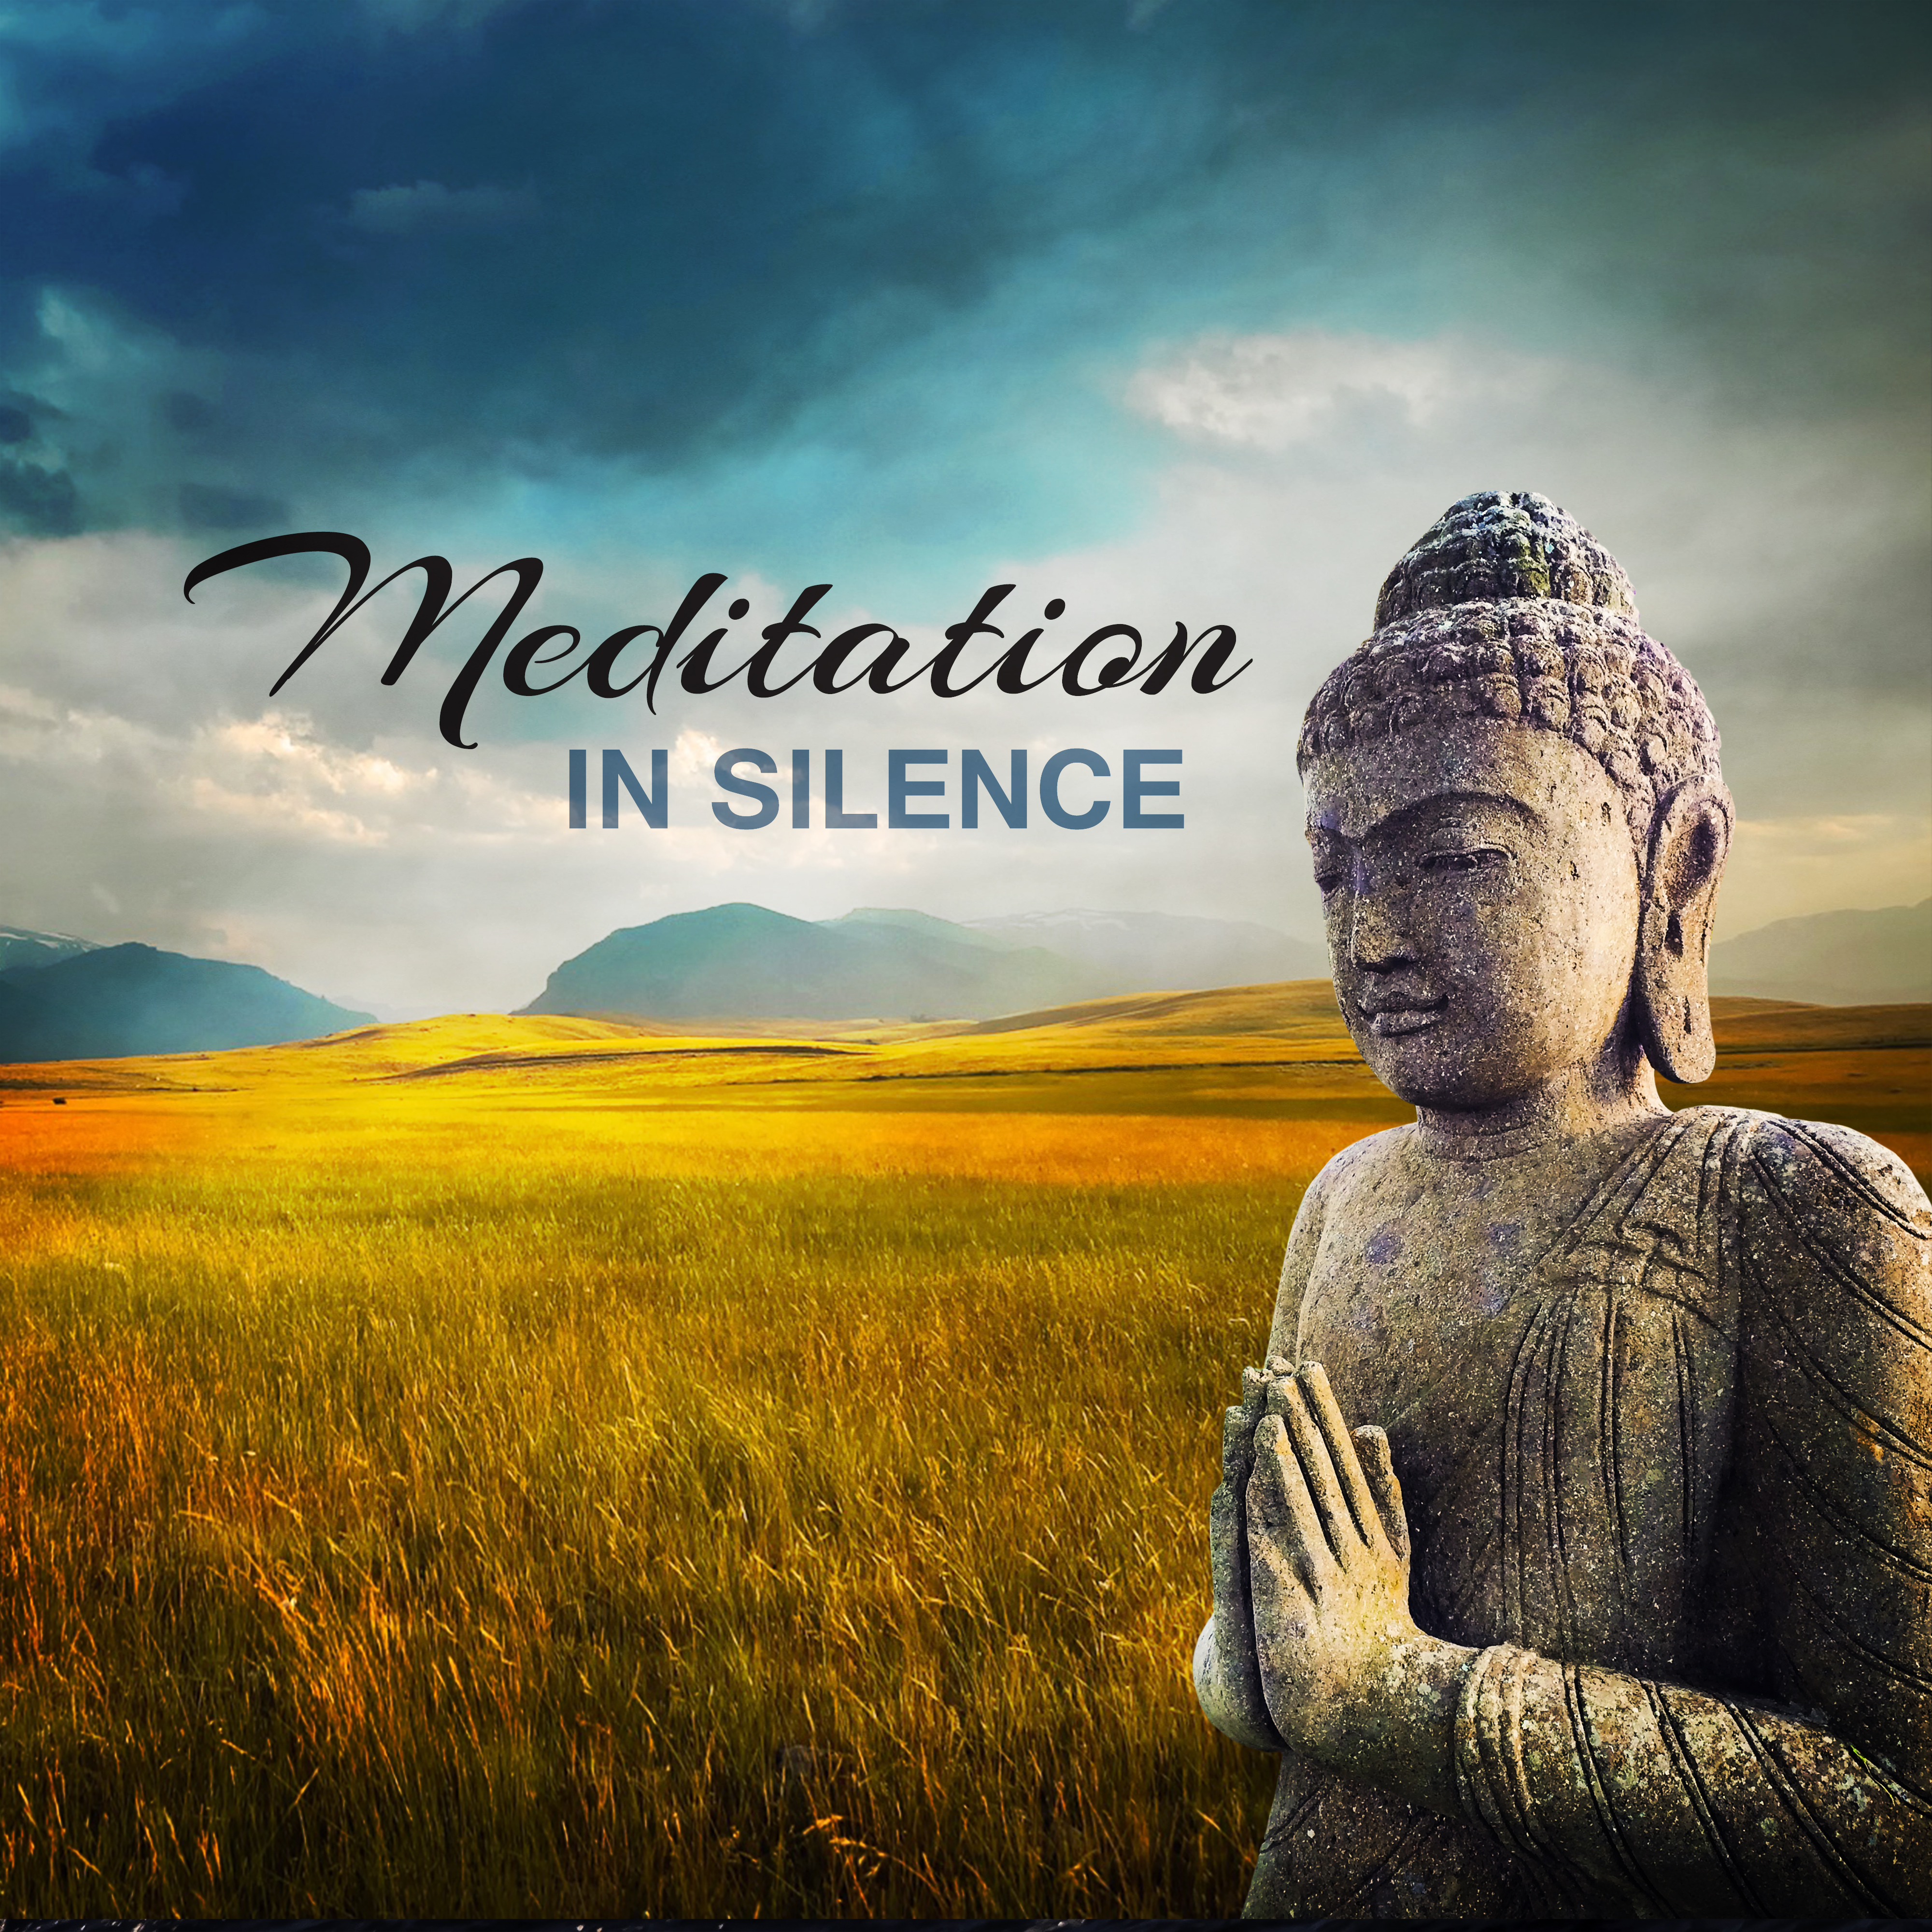 Meditation in Silence – Gentle Nature Sounds to Rest, Pure Relaxation, Harmony, Deep Concentration, Inner Balance, Sounds of Sea, Meditation Music